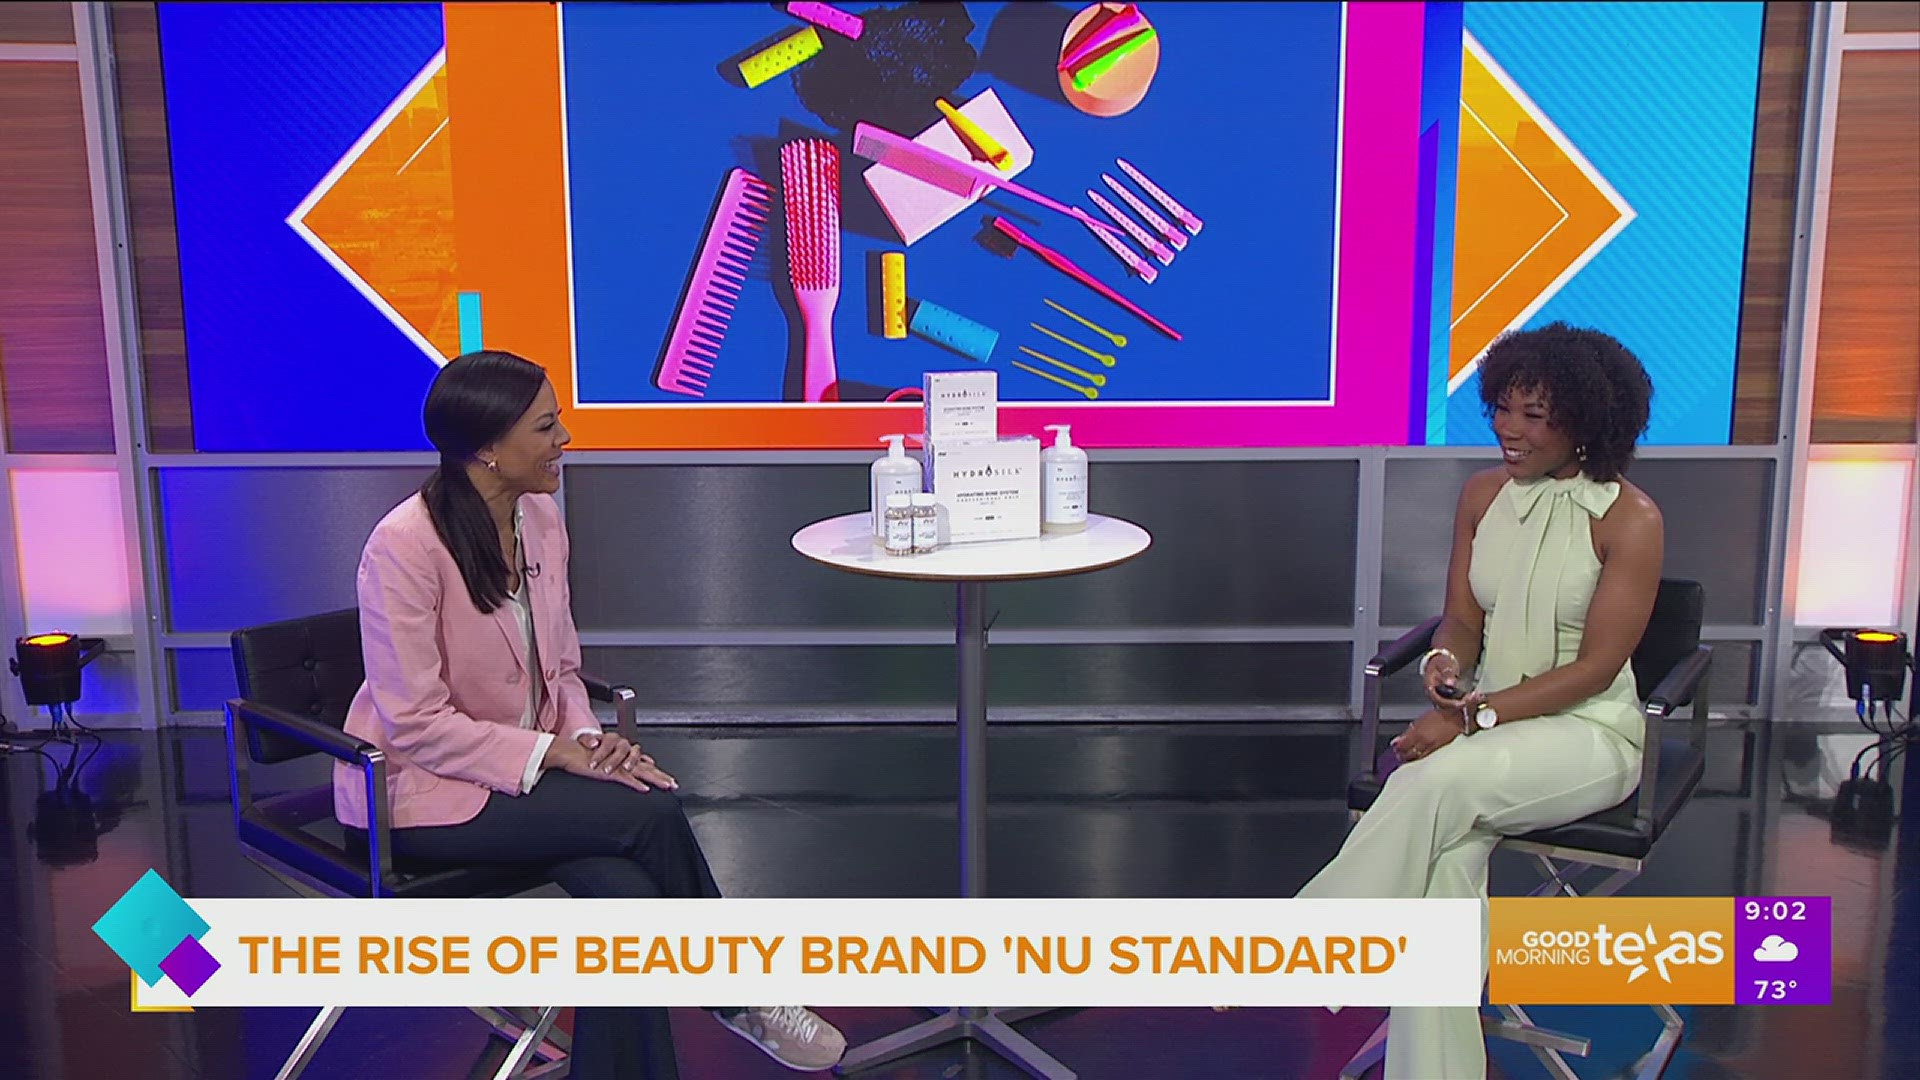 We sit down with the founder of NU Standard Beauty to talk about her legacy in the hair care industry and the rise of her own beauty brand.